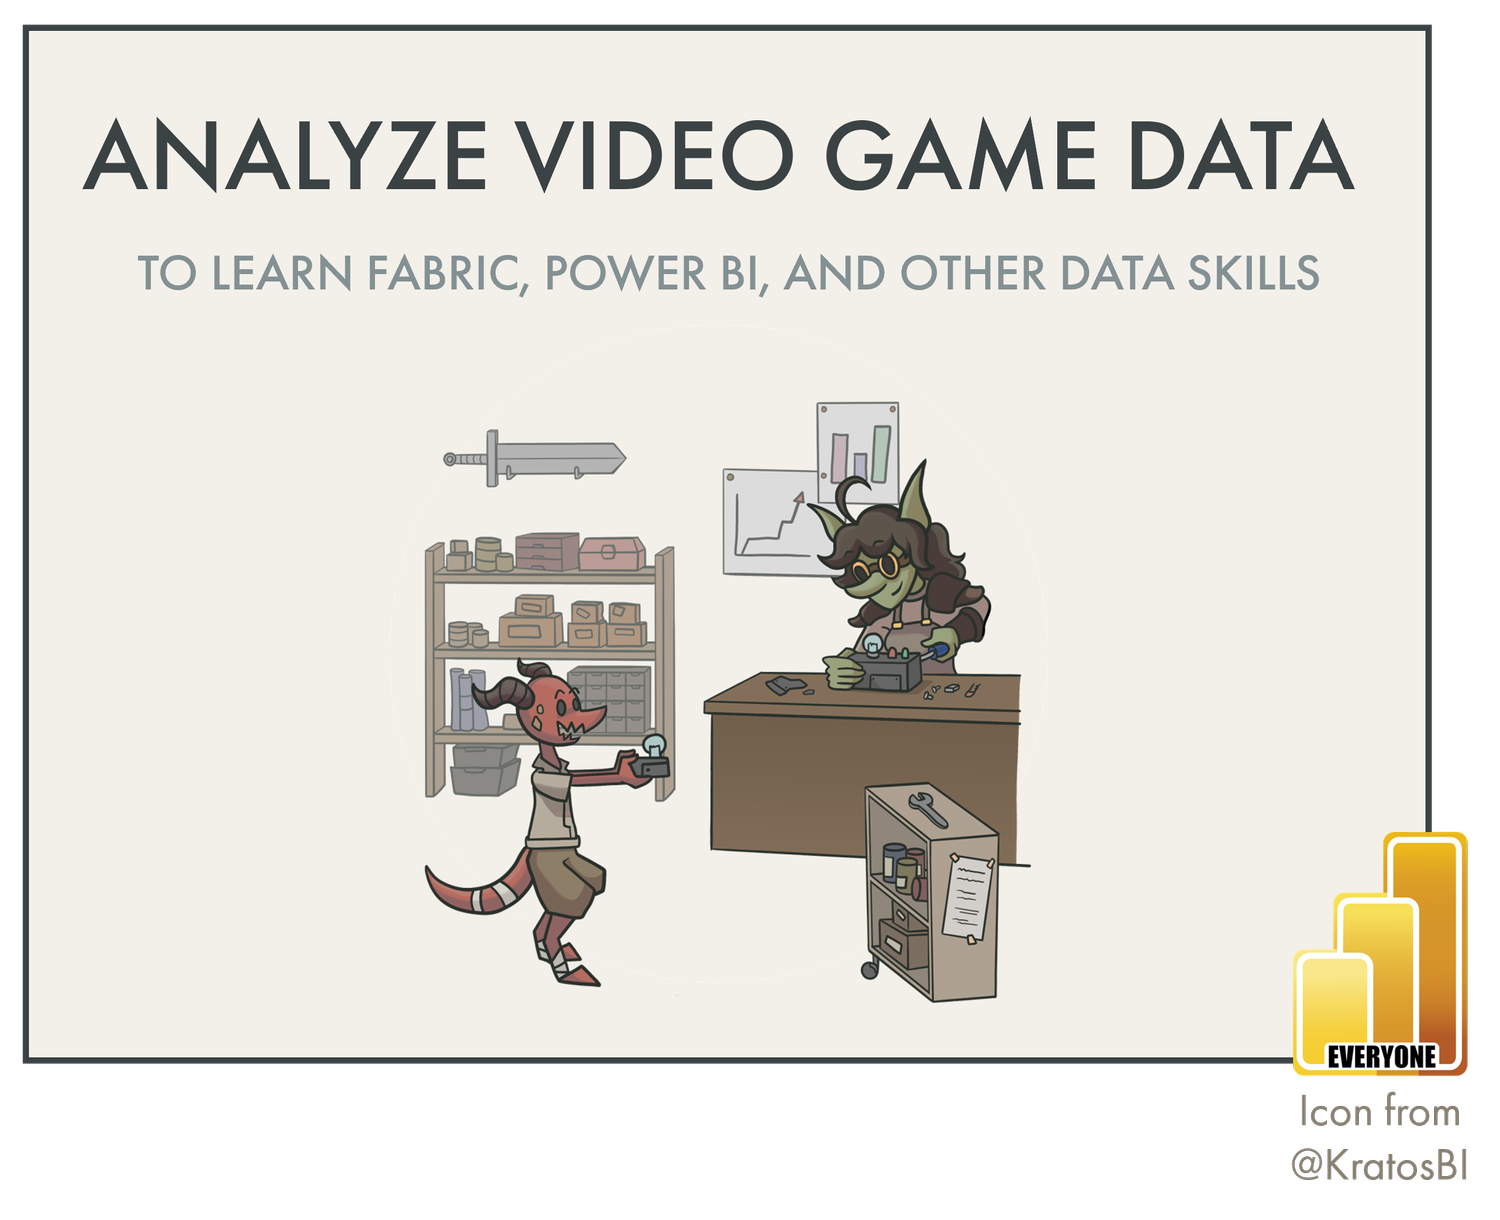 Analyze Video Game Data for Personal Data Projects